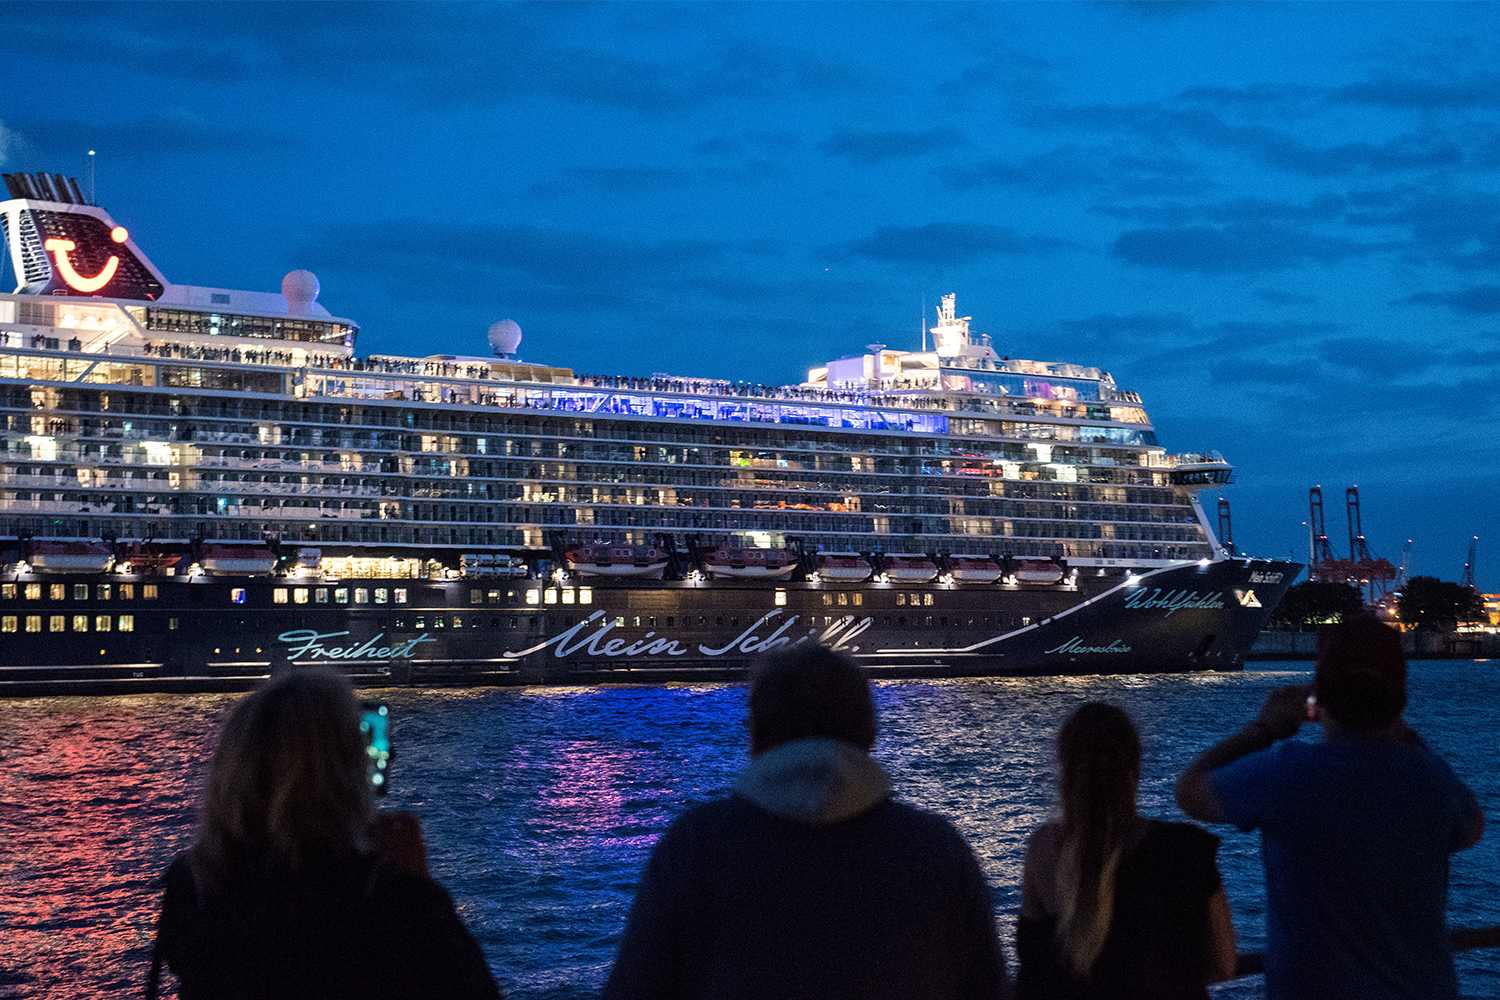 Germany's TUI Cruises ship Mein Schiff 2 leaving port on July 24, 2020